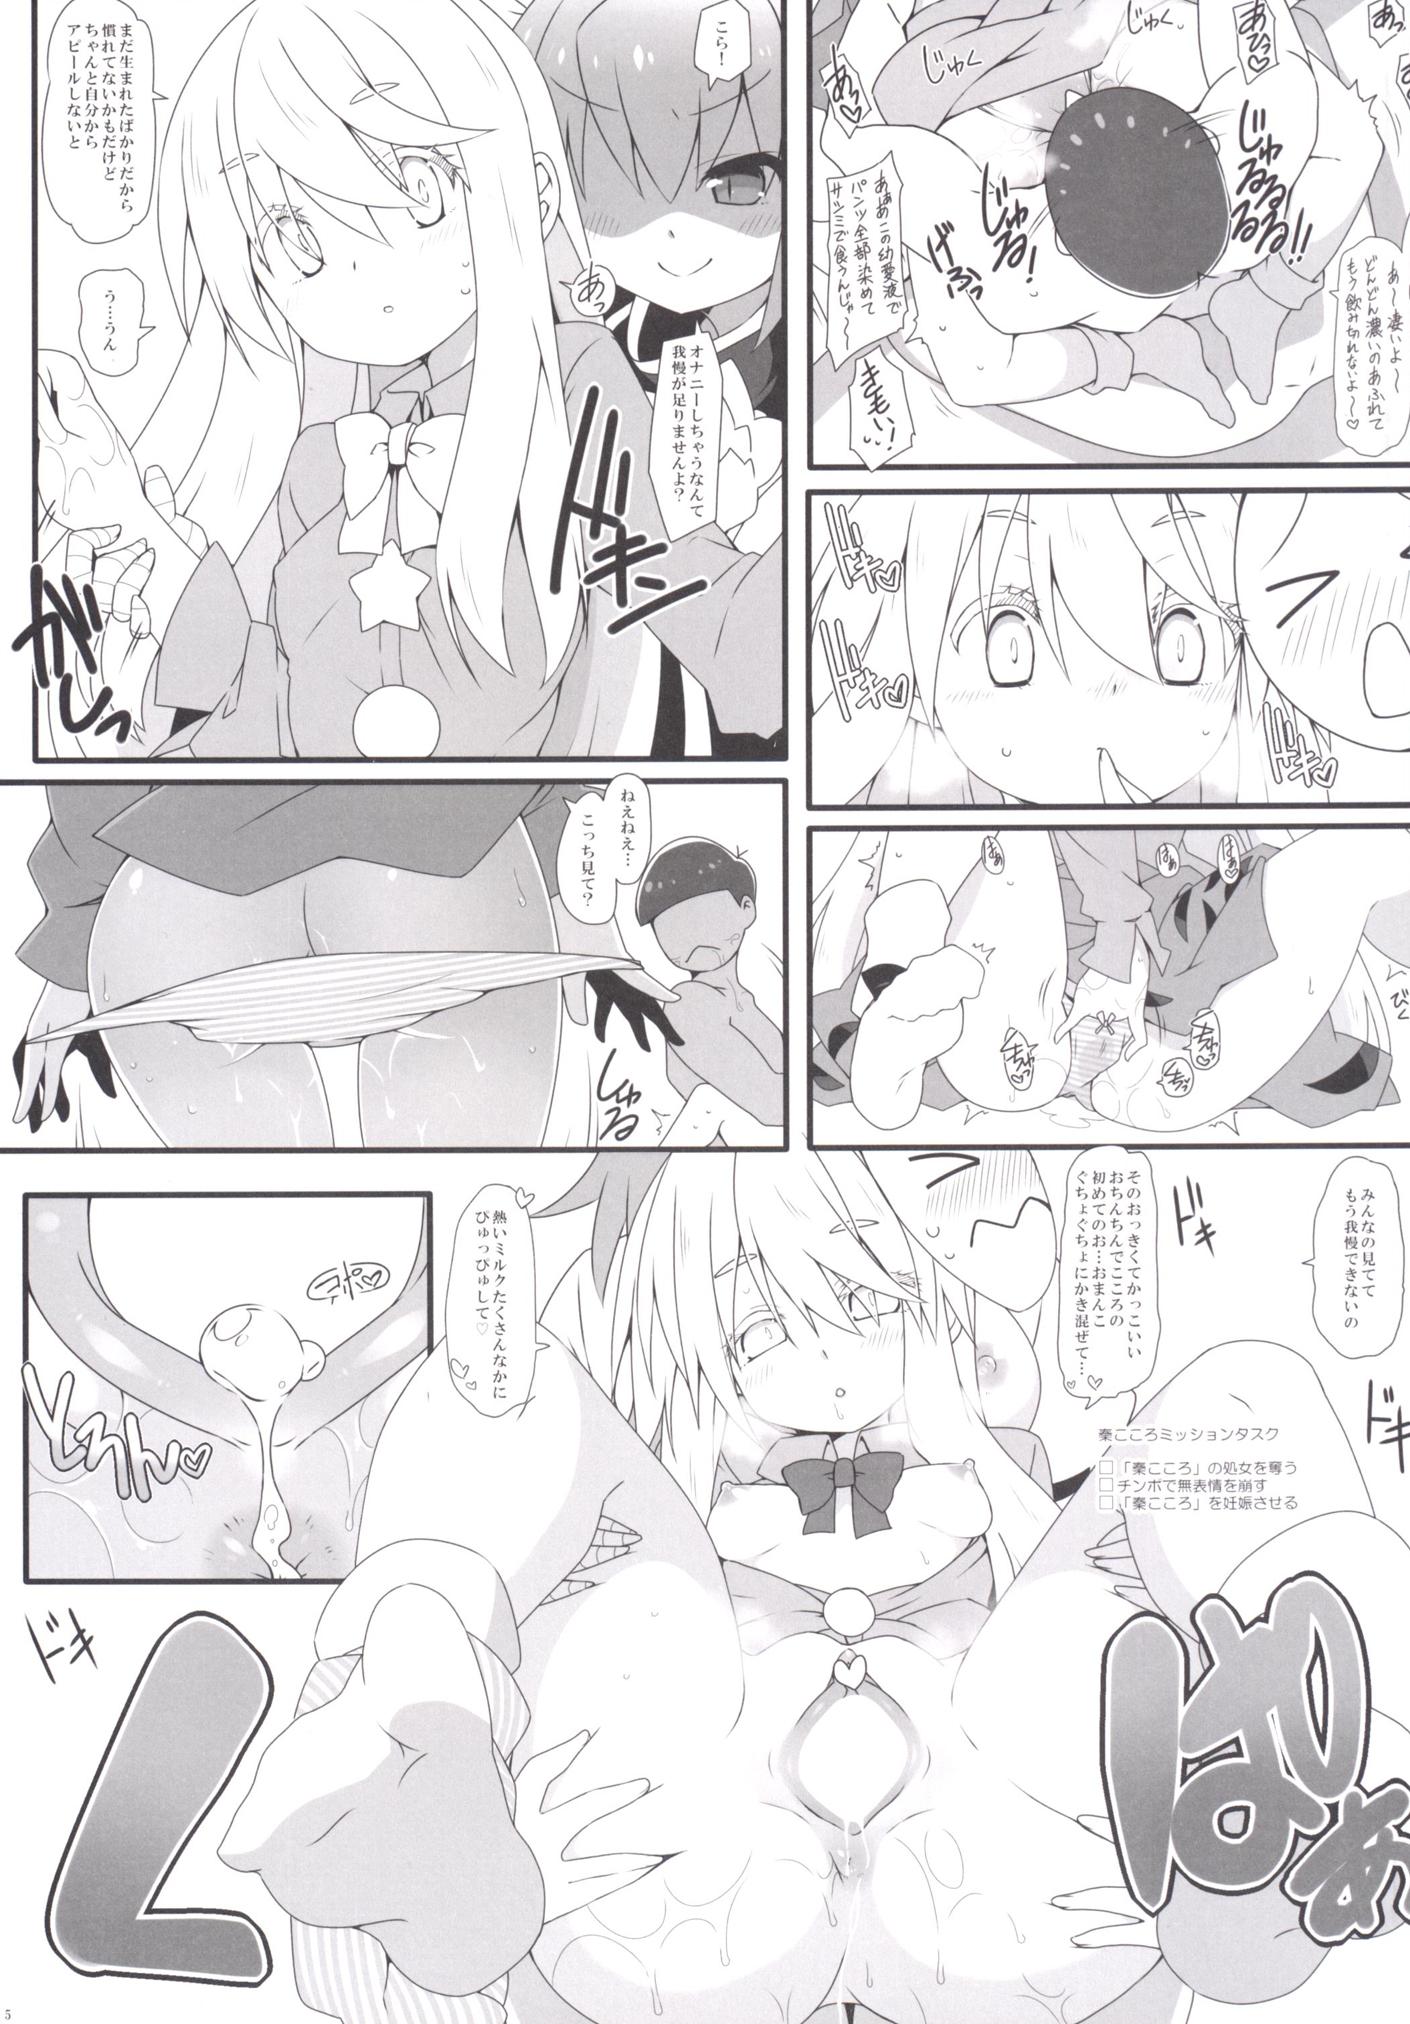 Girl On Girl MissionIn:Pink - Touhou project Free 18 Year Old Porn - Page 6